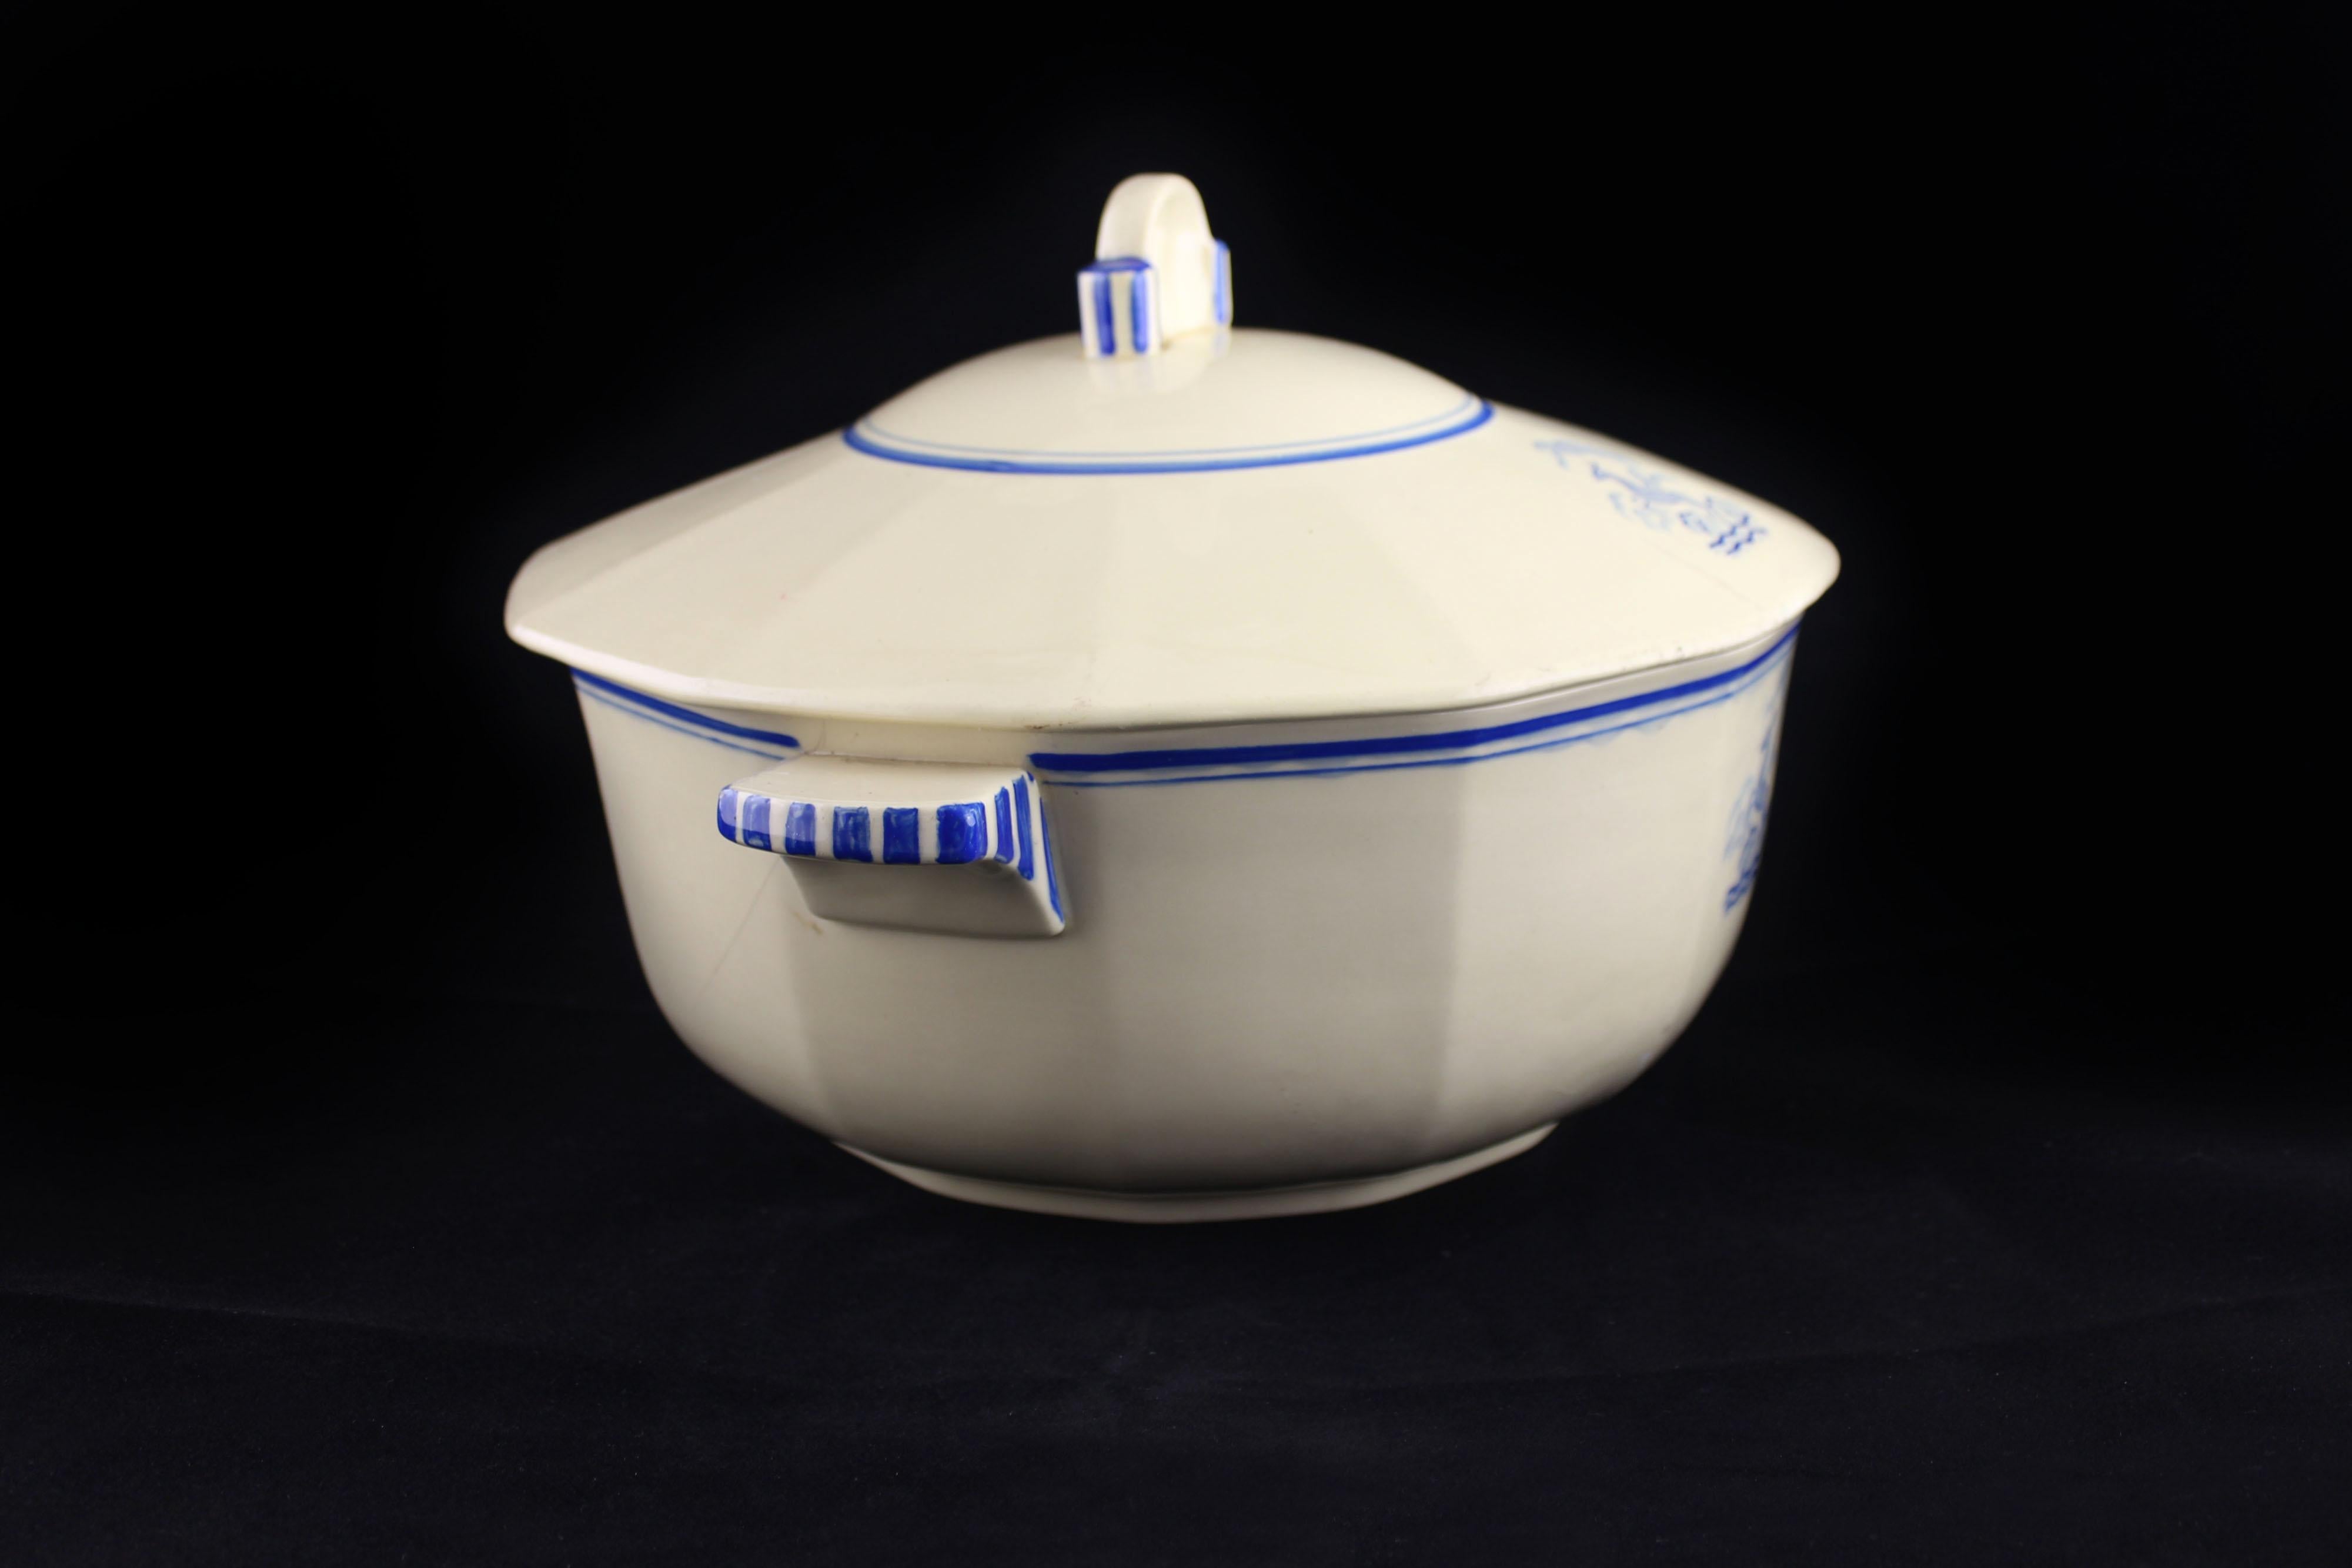 Rare Bosch Freres soup tureen. Ivory color decorated in blue with deer. Under base the Bosch Freres brand name in blue and the name Sprimont engraved in paste. The soup tureen is in good condition, but it has 2 ancient internal spins, in